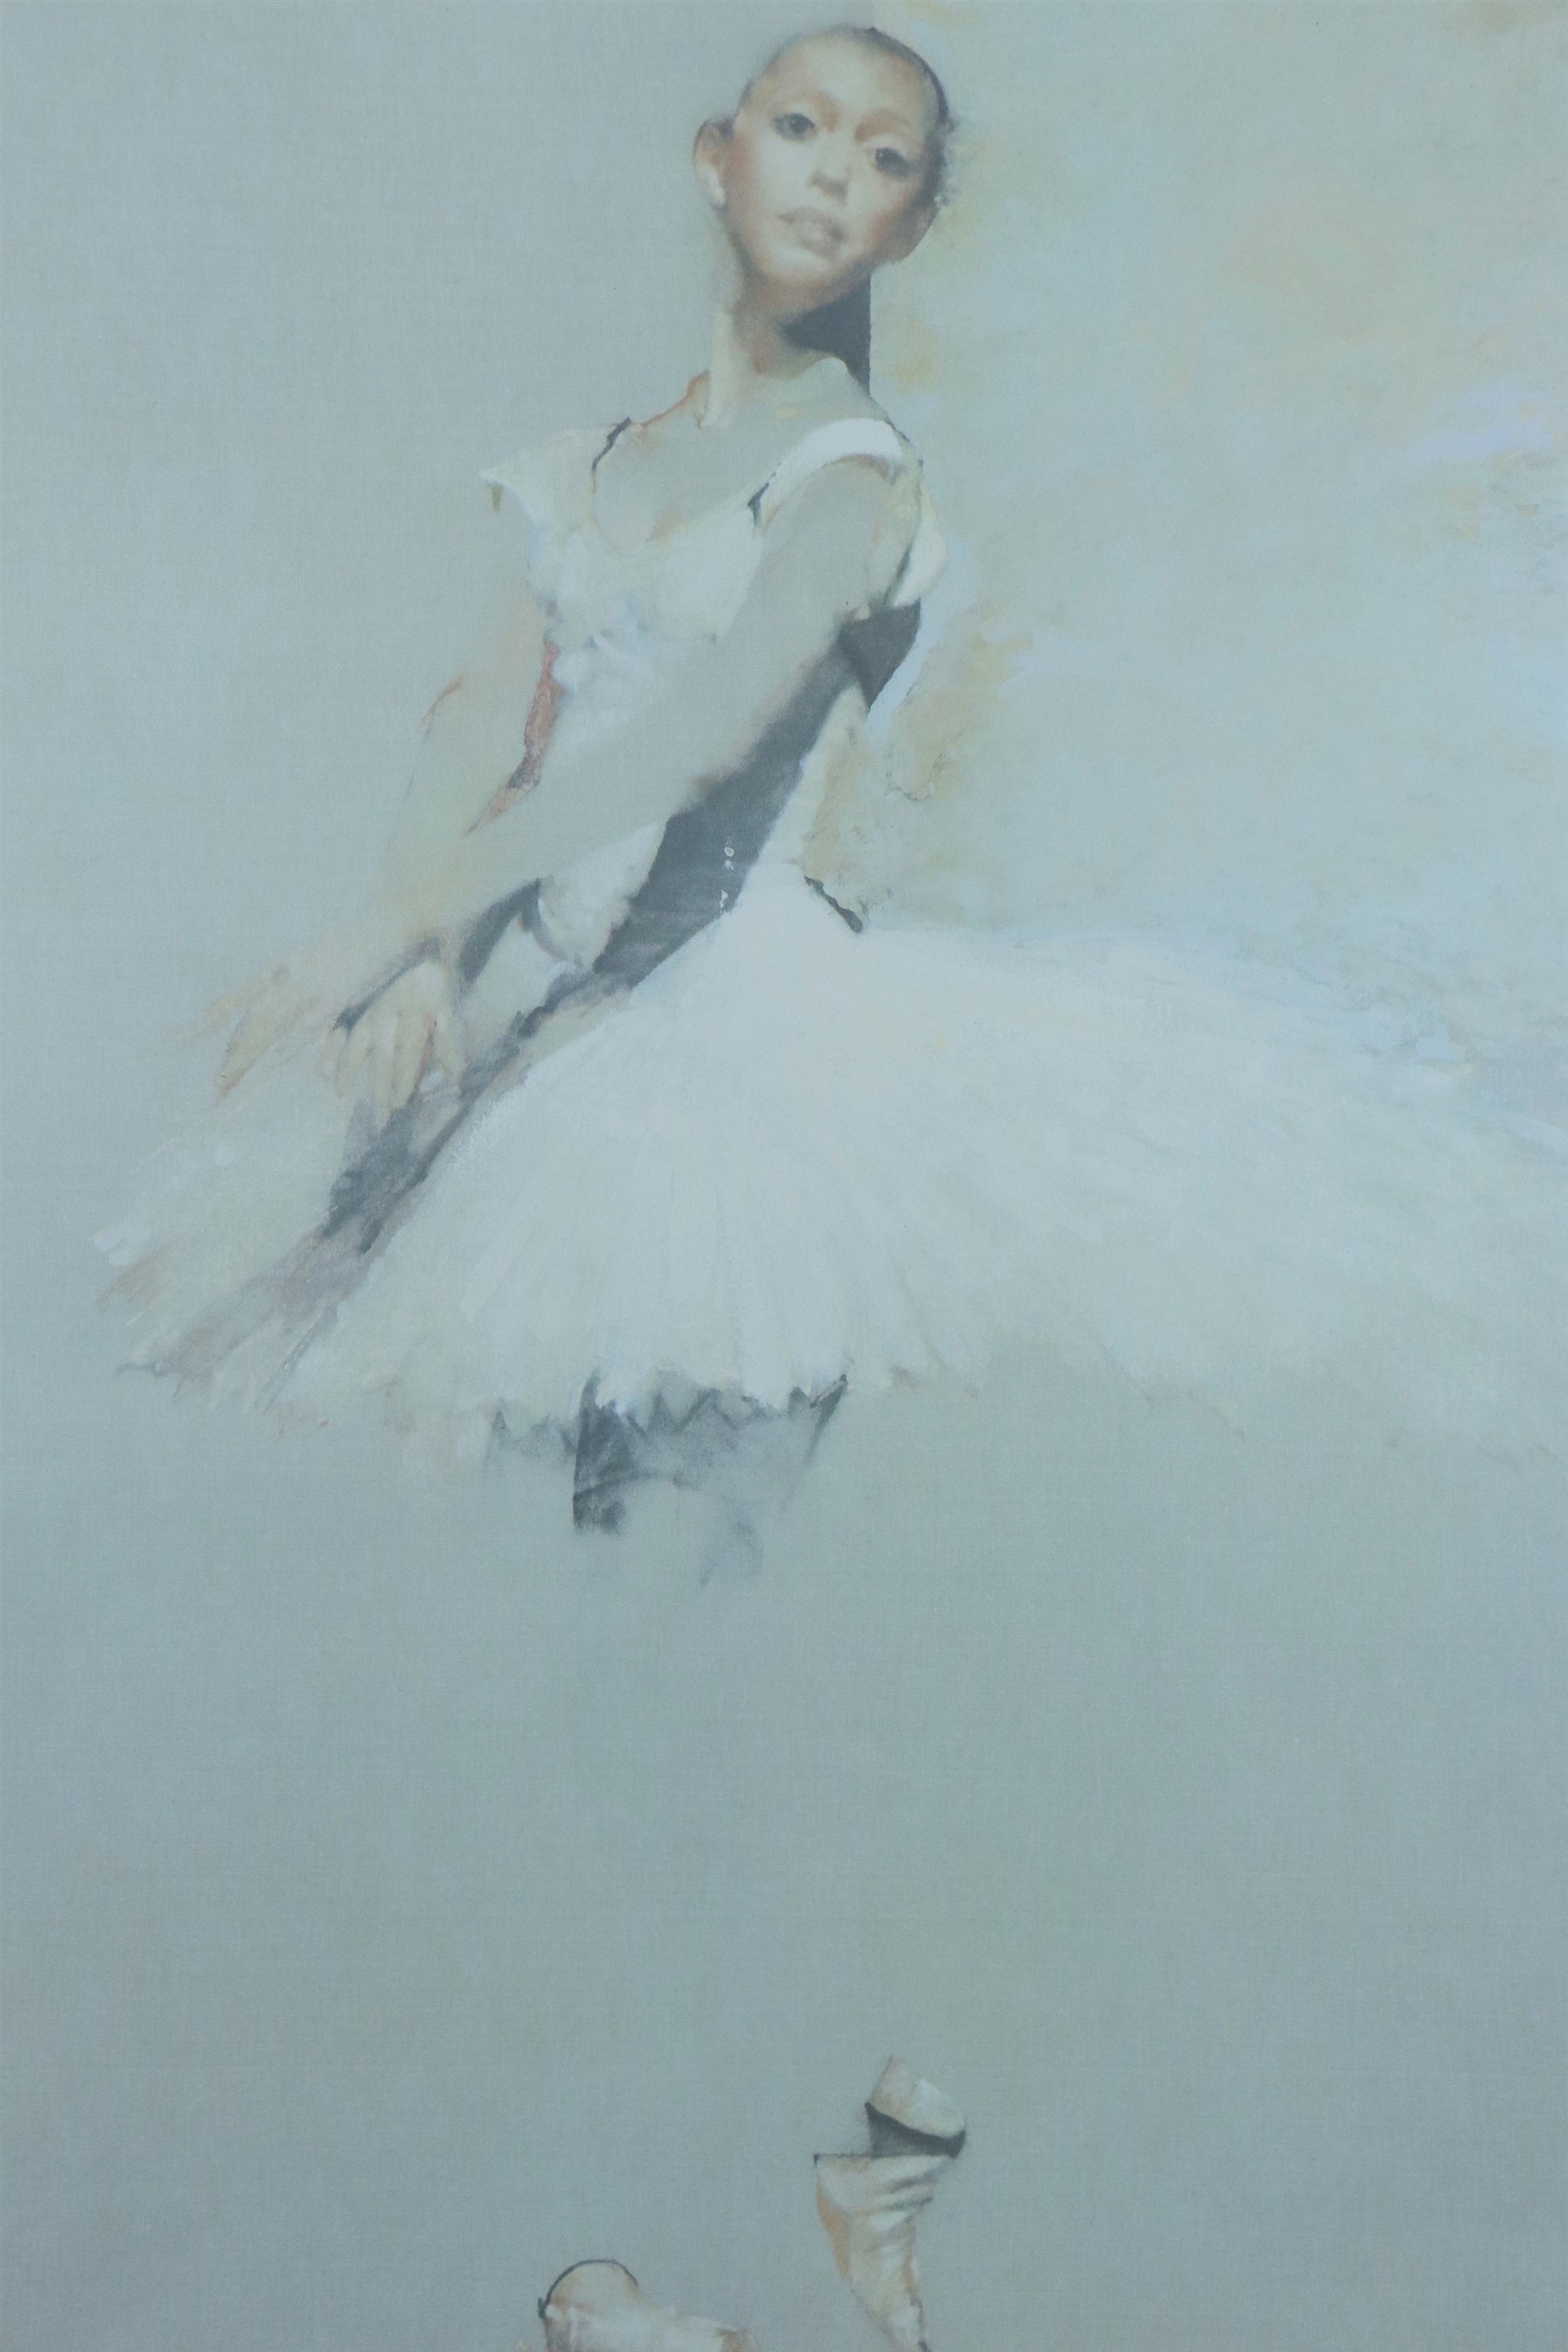 After Robert Heindel (1938-2005) Limited edition print of a young ballerina, pencil signed by the